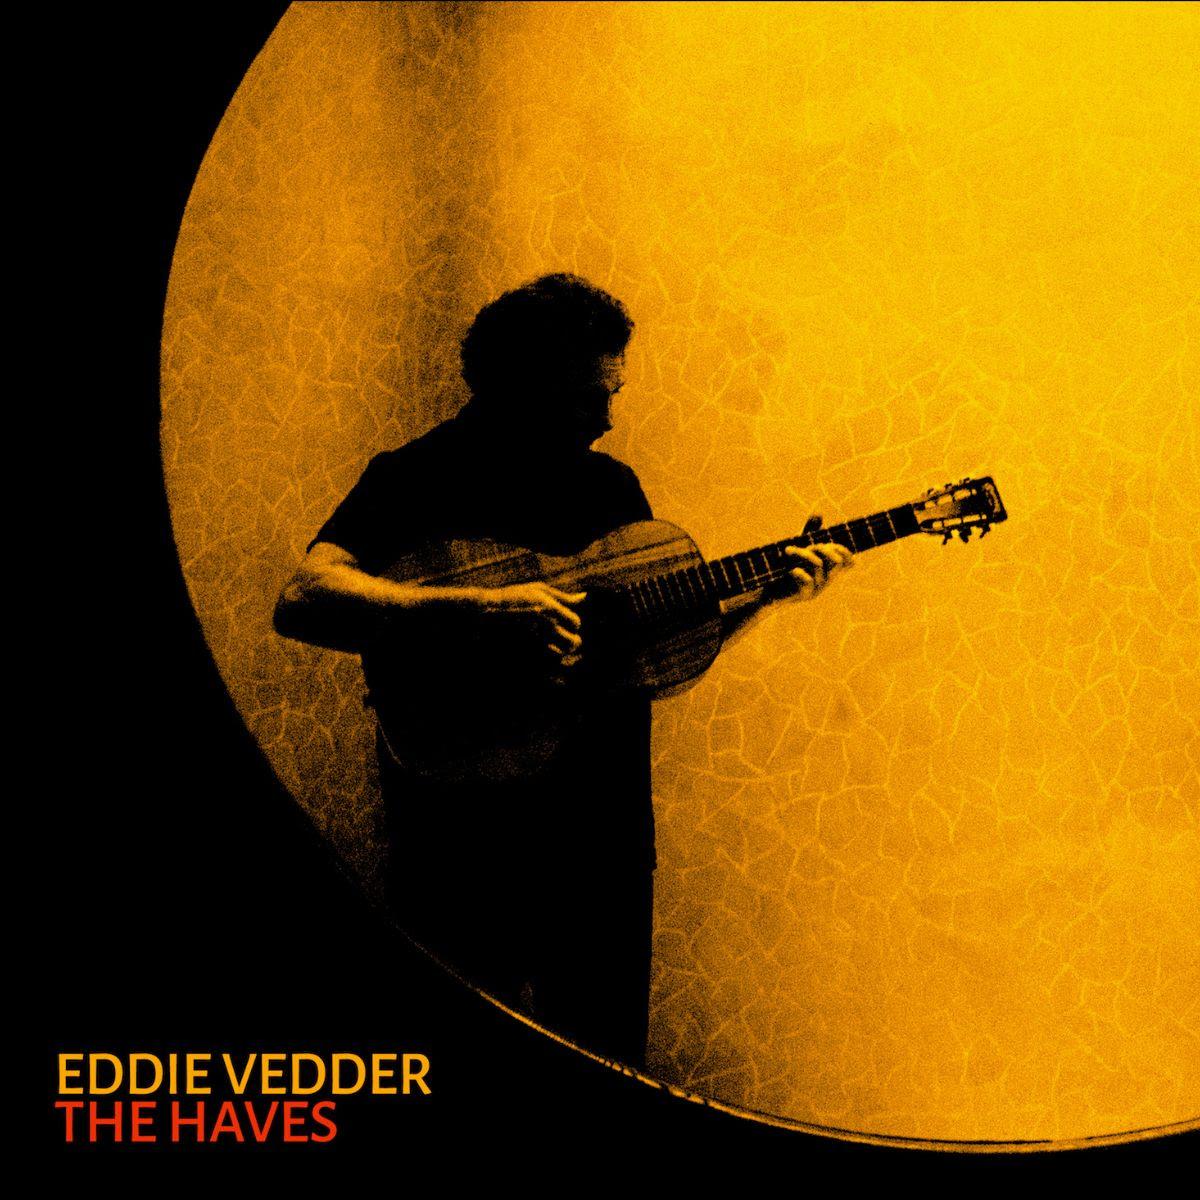 Eddie Vedder announces new album 'Earthling' & reveals 'The Haves'